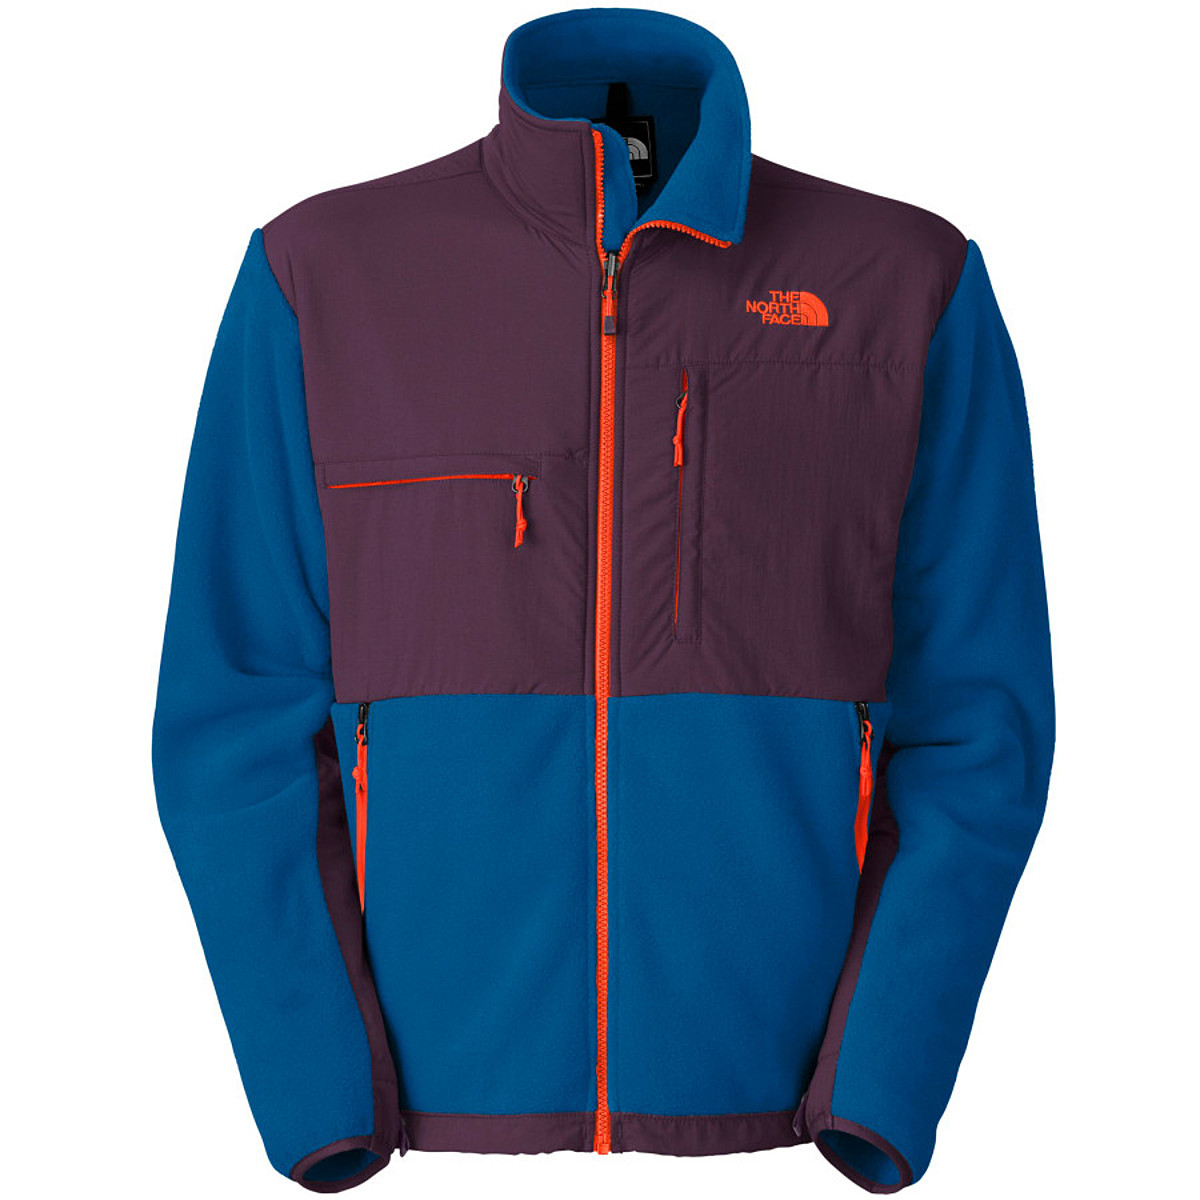 THE NORTH FACE - 21 最新カラー THE NORTH FACE DENALI 2 HOODIEの+